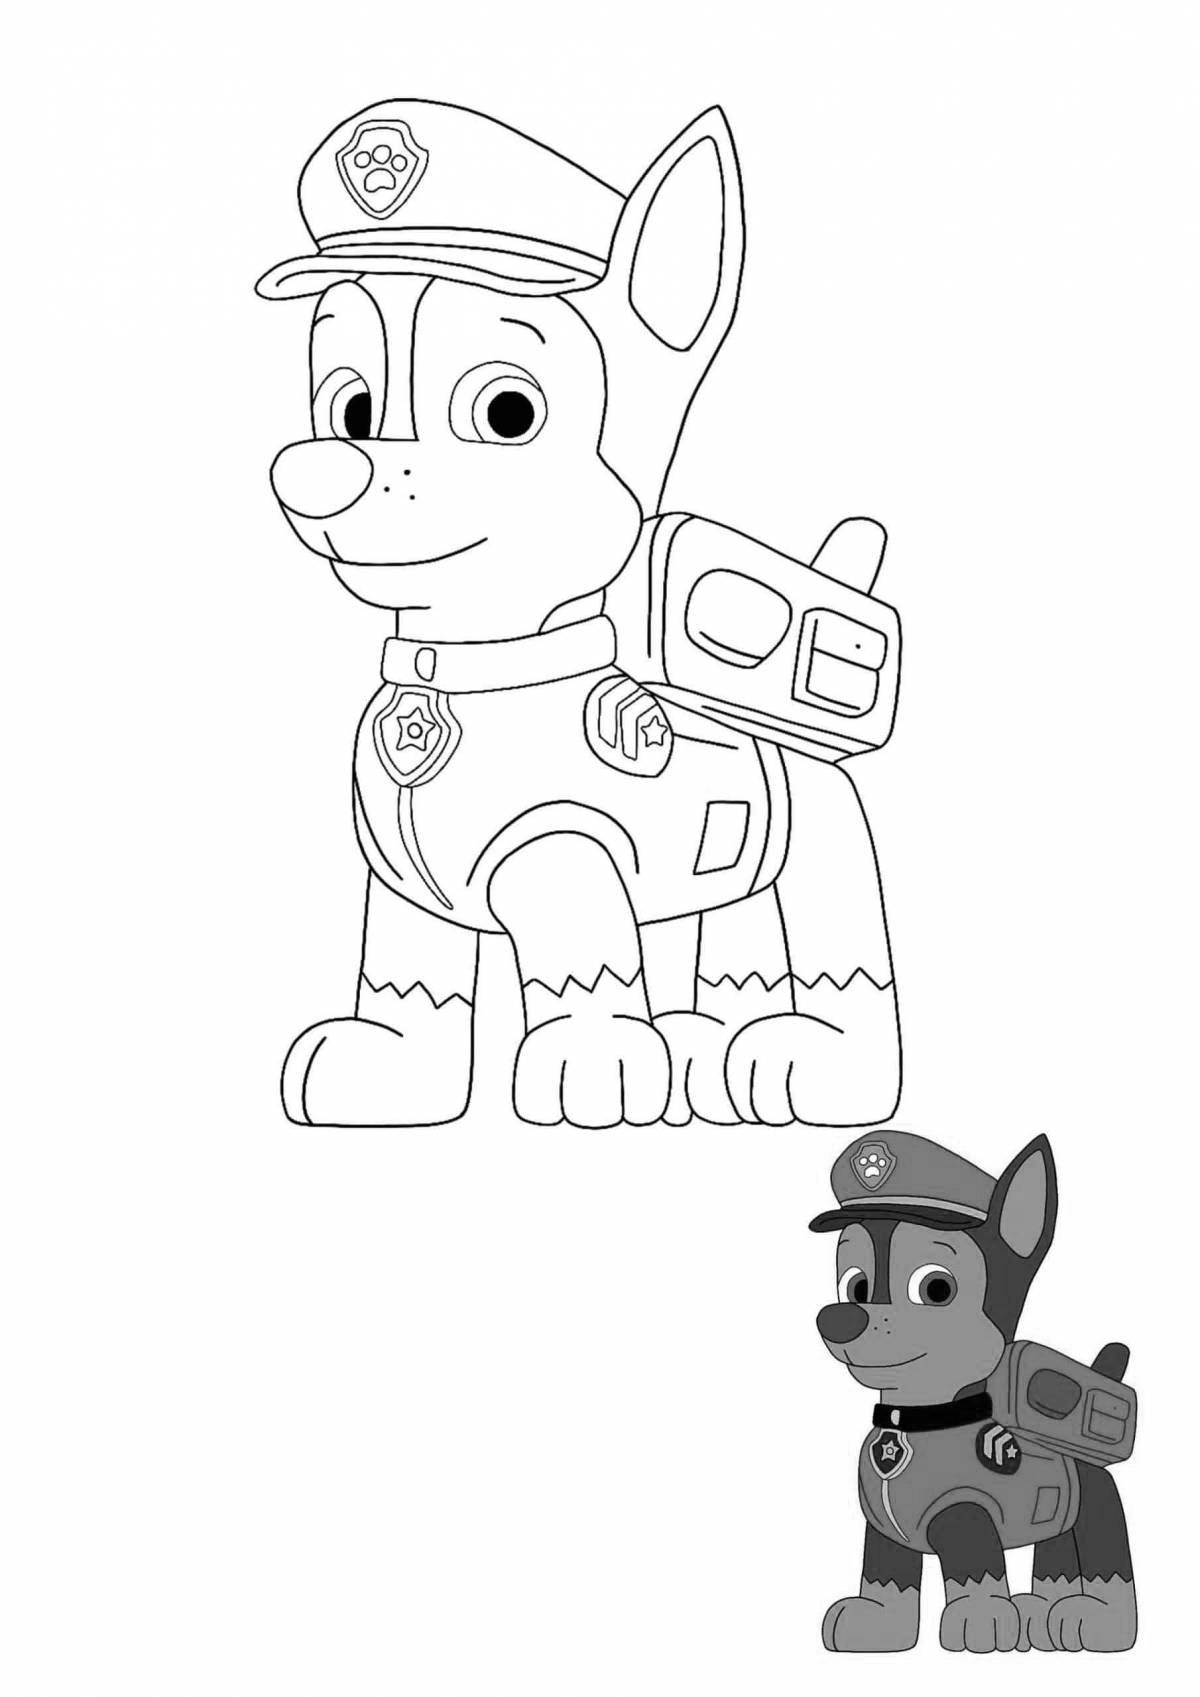 The Fearless Paw Patrol